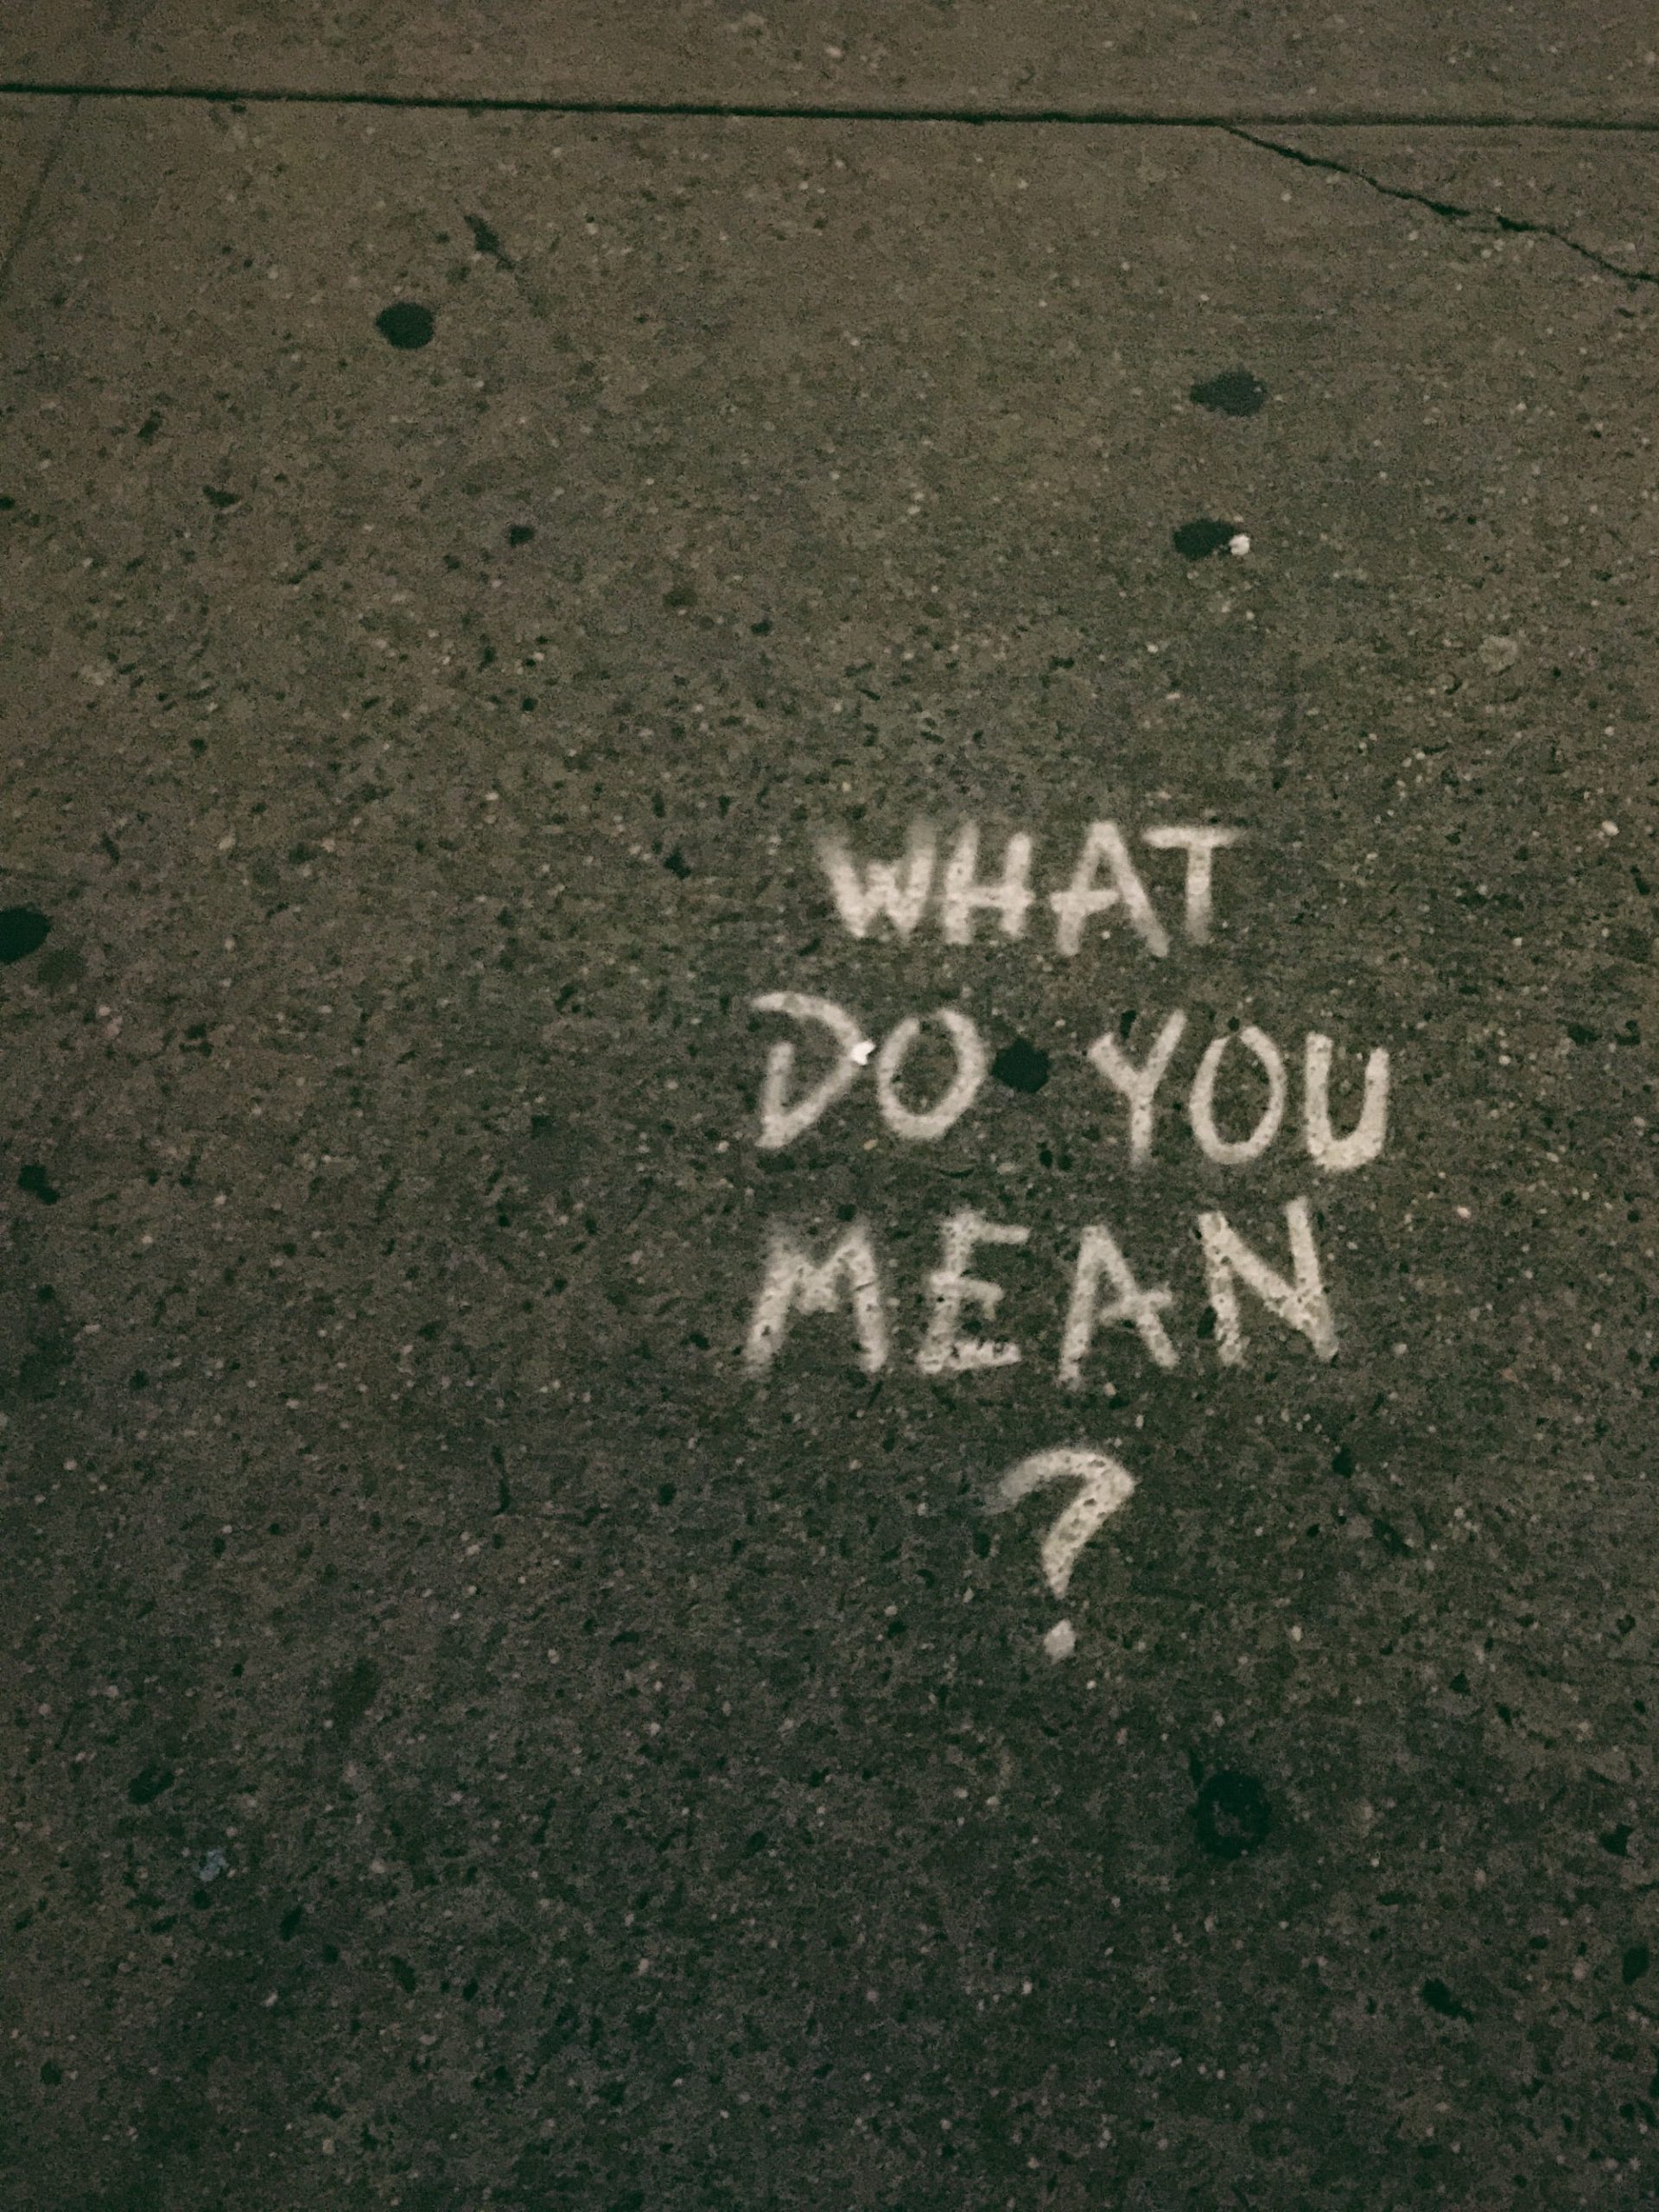 What do you mean is written on the pavement